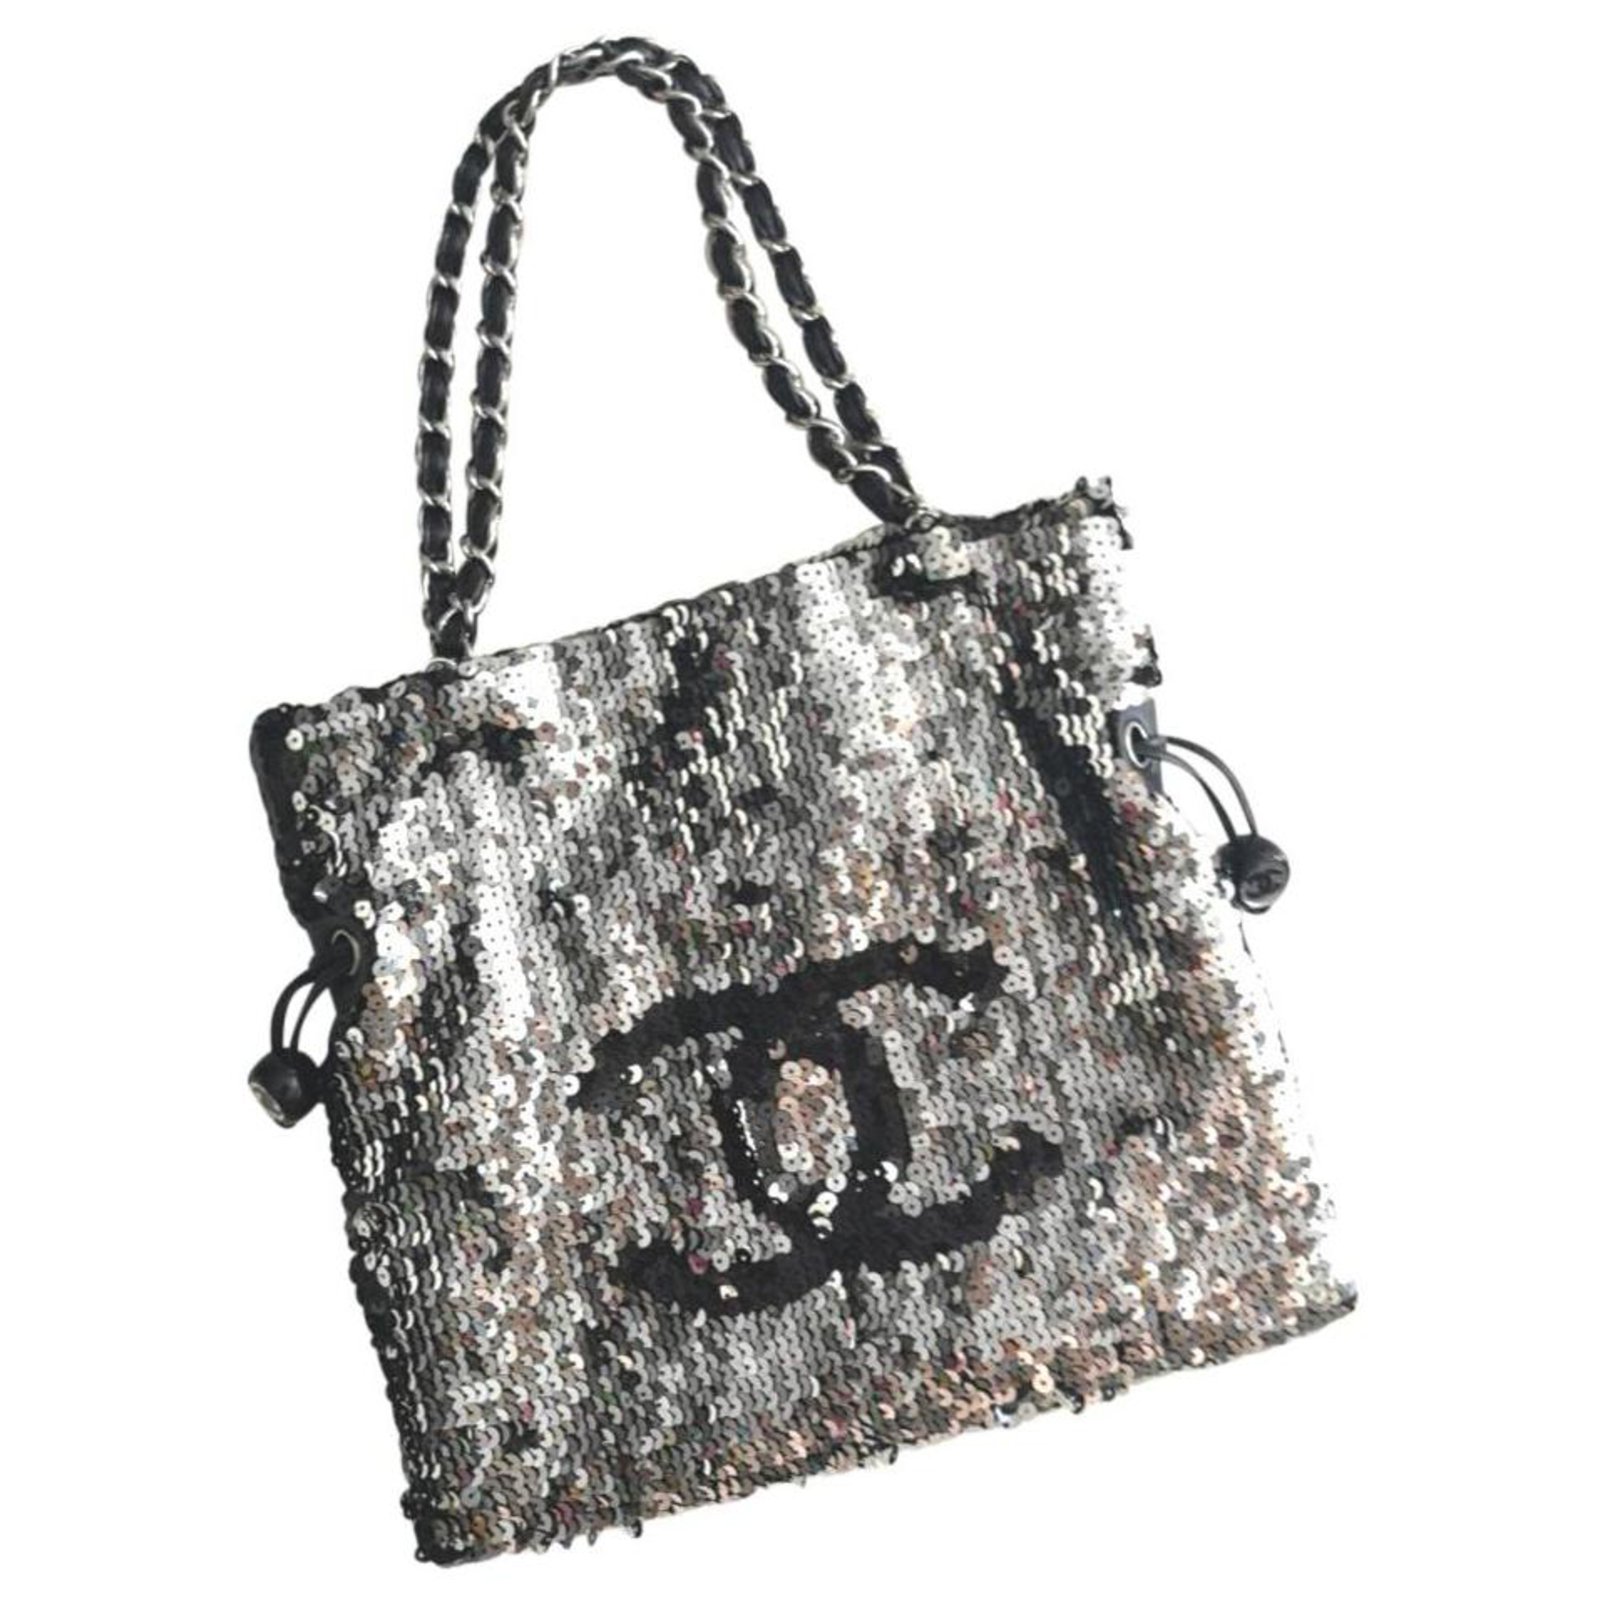 GREY AND BLACK SEQUIN WITH SILVER-TONE METAL TOTE HANDBAG, CHANEL, A  Collection of a Lifetime: Chanel Online, Jewellery